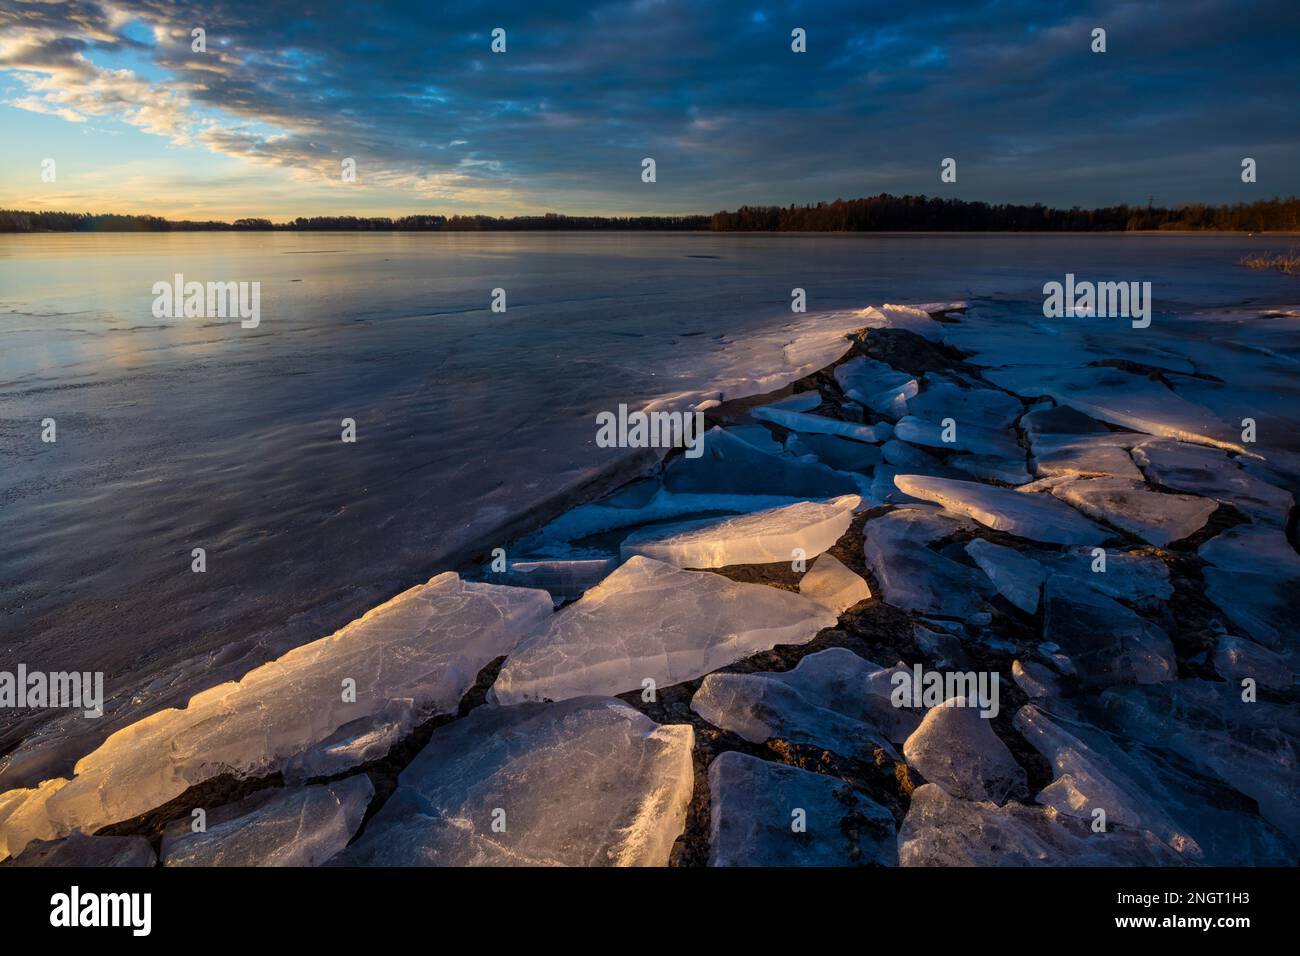 Cracked ice formation at dawn in the lake Vansjø, Østfold, Norway, Scandinavia, Stock Photo